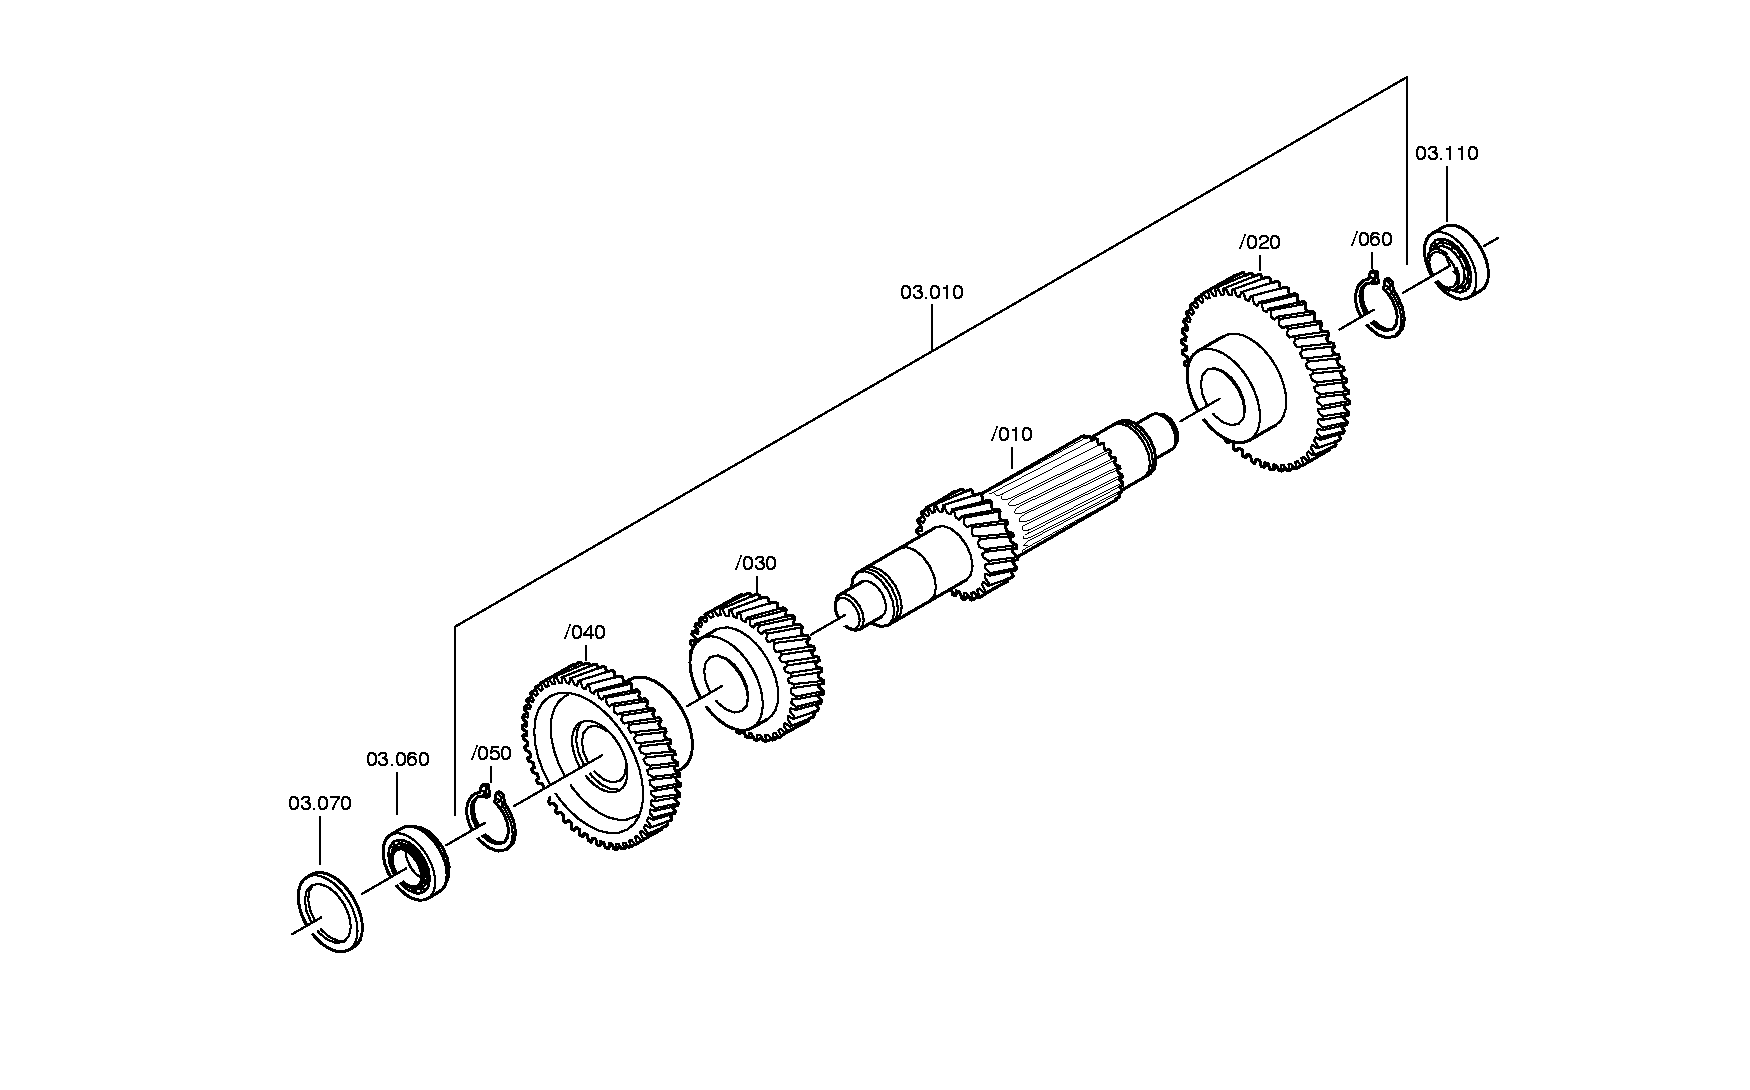 drawing for NISSAN MOTOR CO. 07903035-0 - COUNTERSHAFT (figure 1)